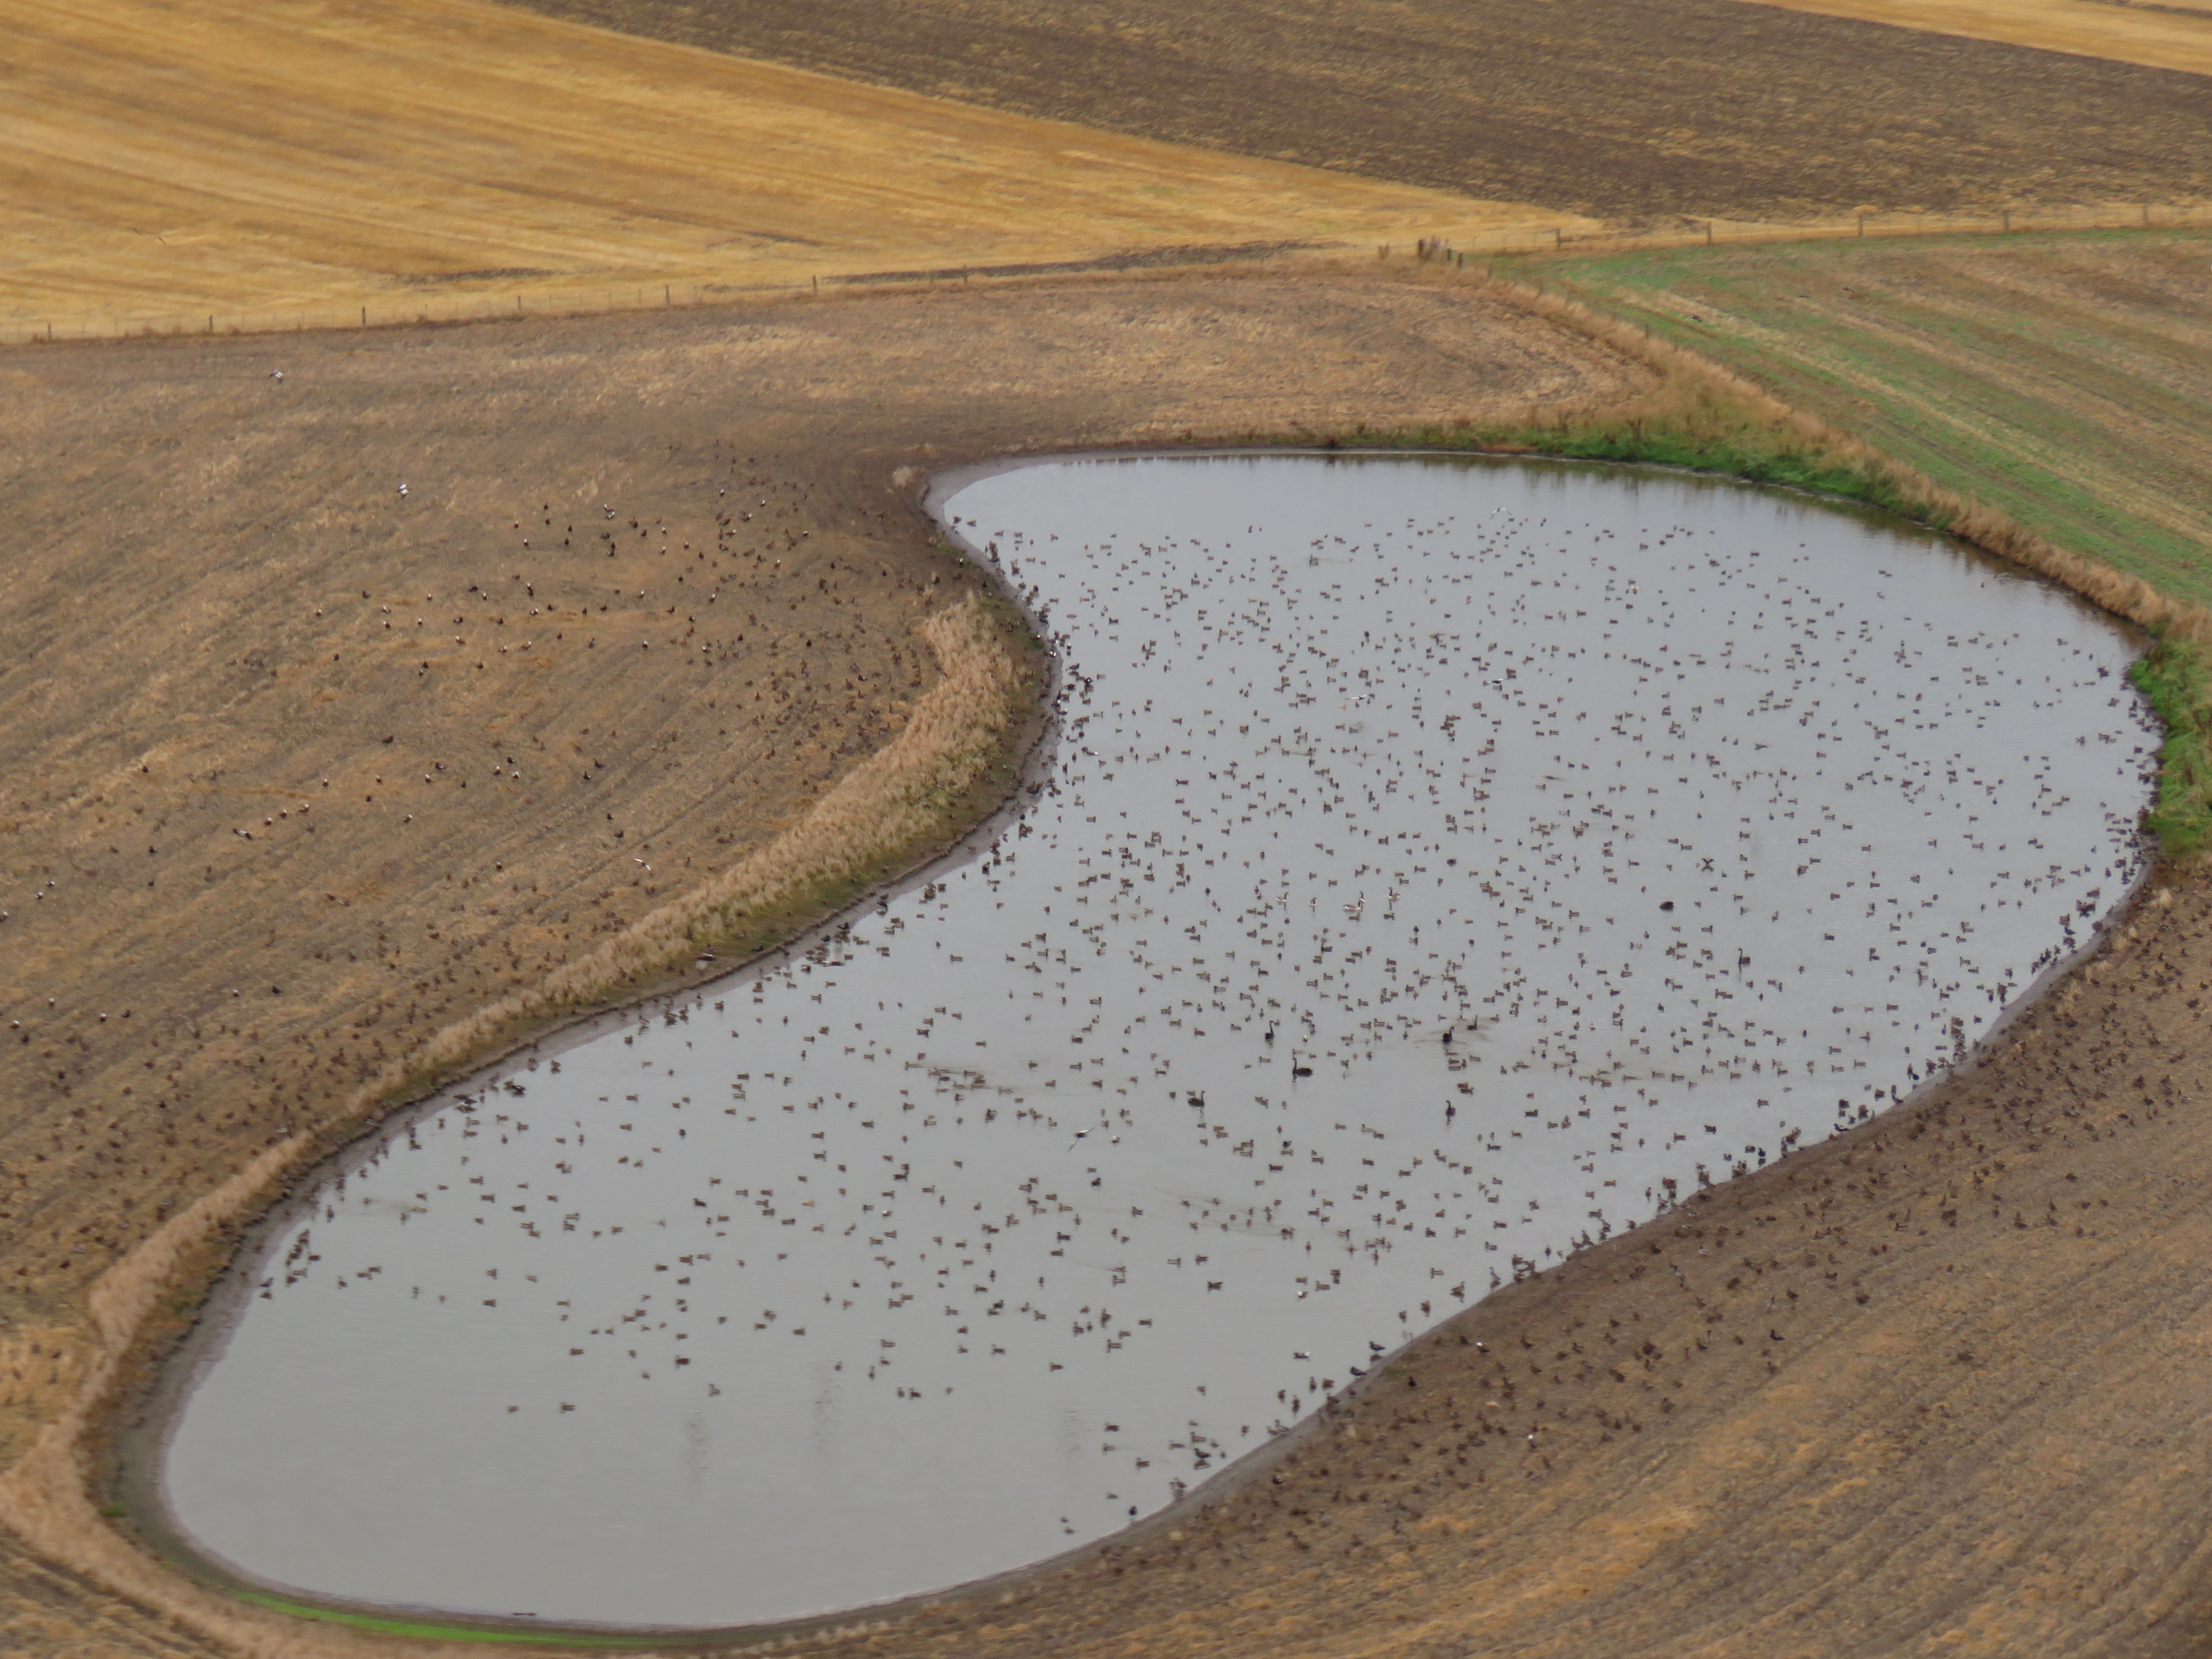 CSI APRIL BB 2 hundreds of game birds congregate on a pond near harvested crops South Canterbury March 2019 credit R Adams 